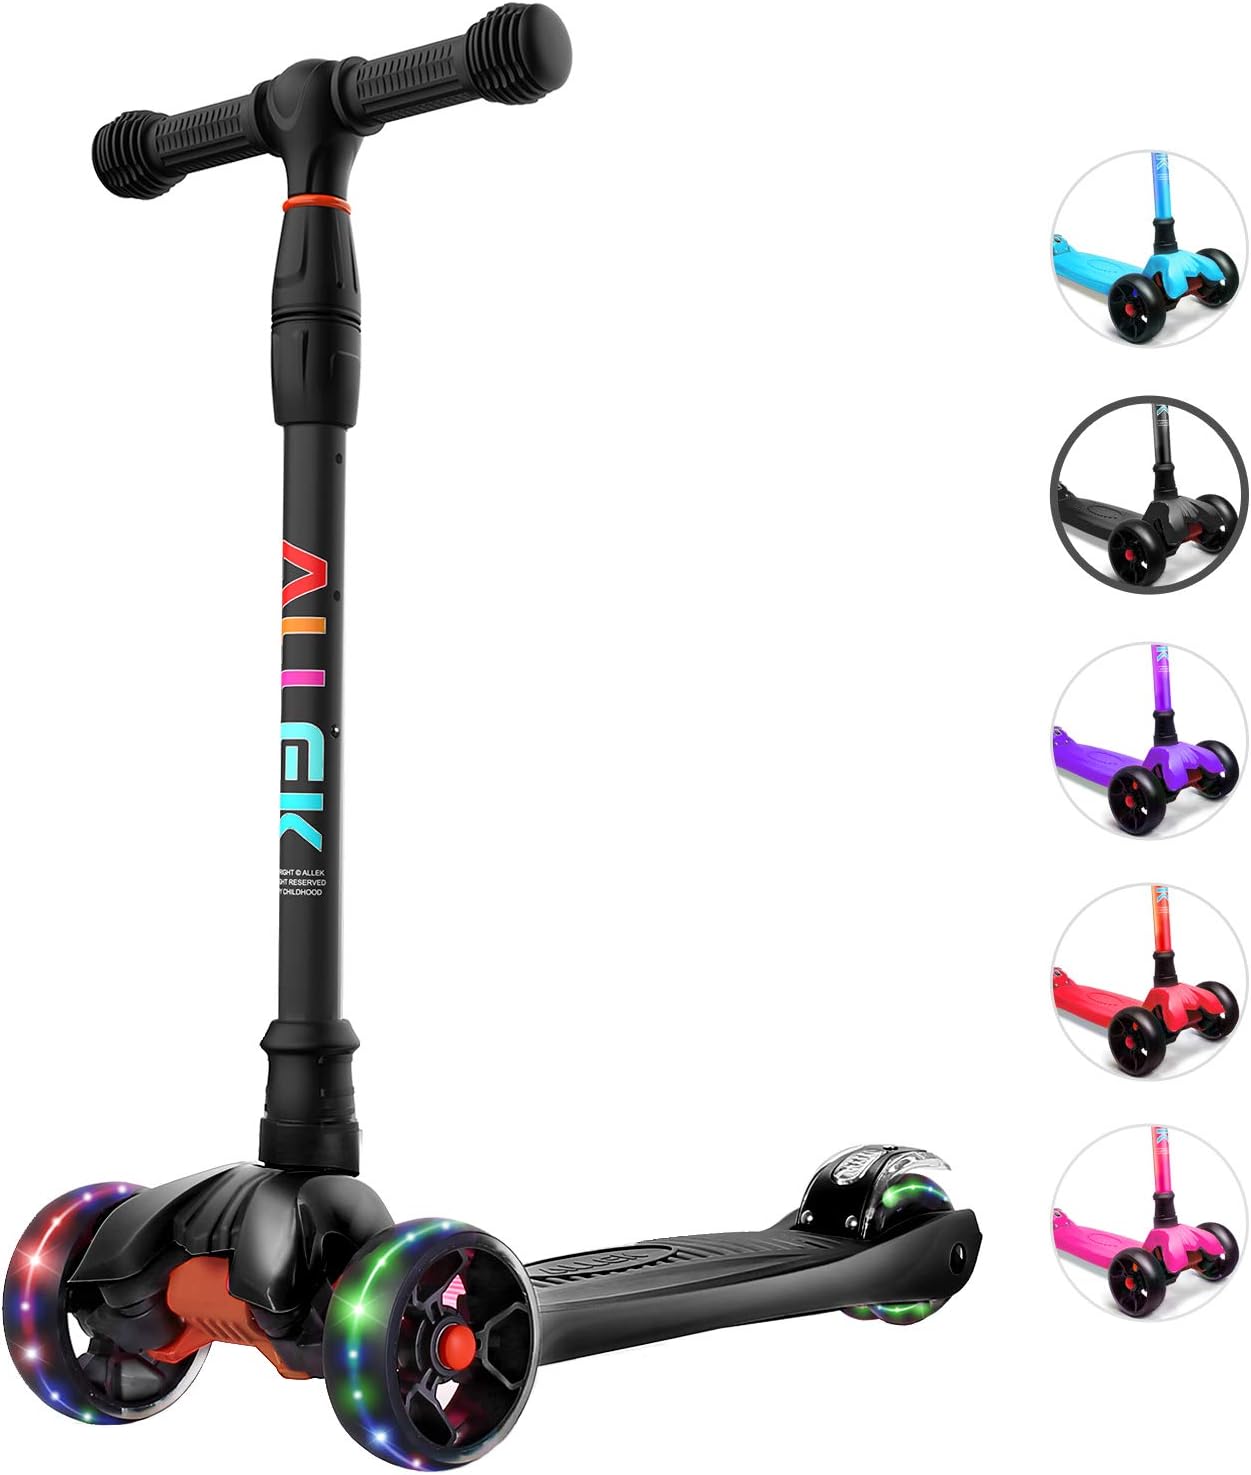 Allek Kick Scooter B02, Lean 'N Glide Scooter with Extra Wide PU Light-Up Wheels and 4 Adjustable Heights for Children from 3-12yrs (Black)